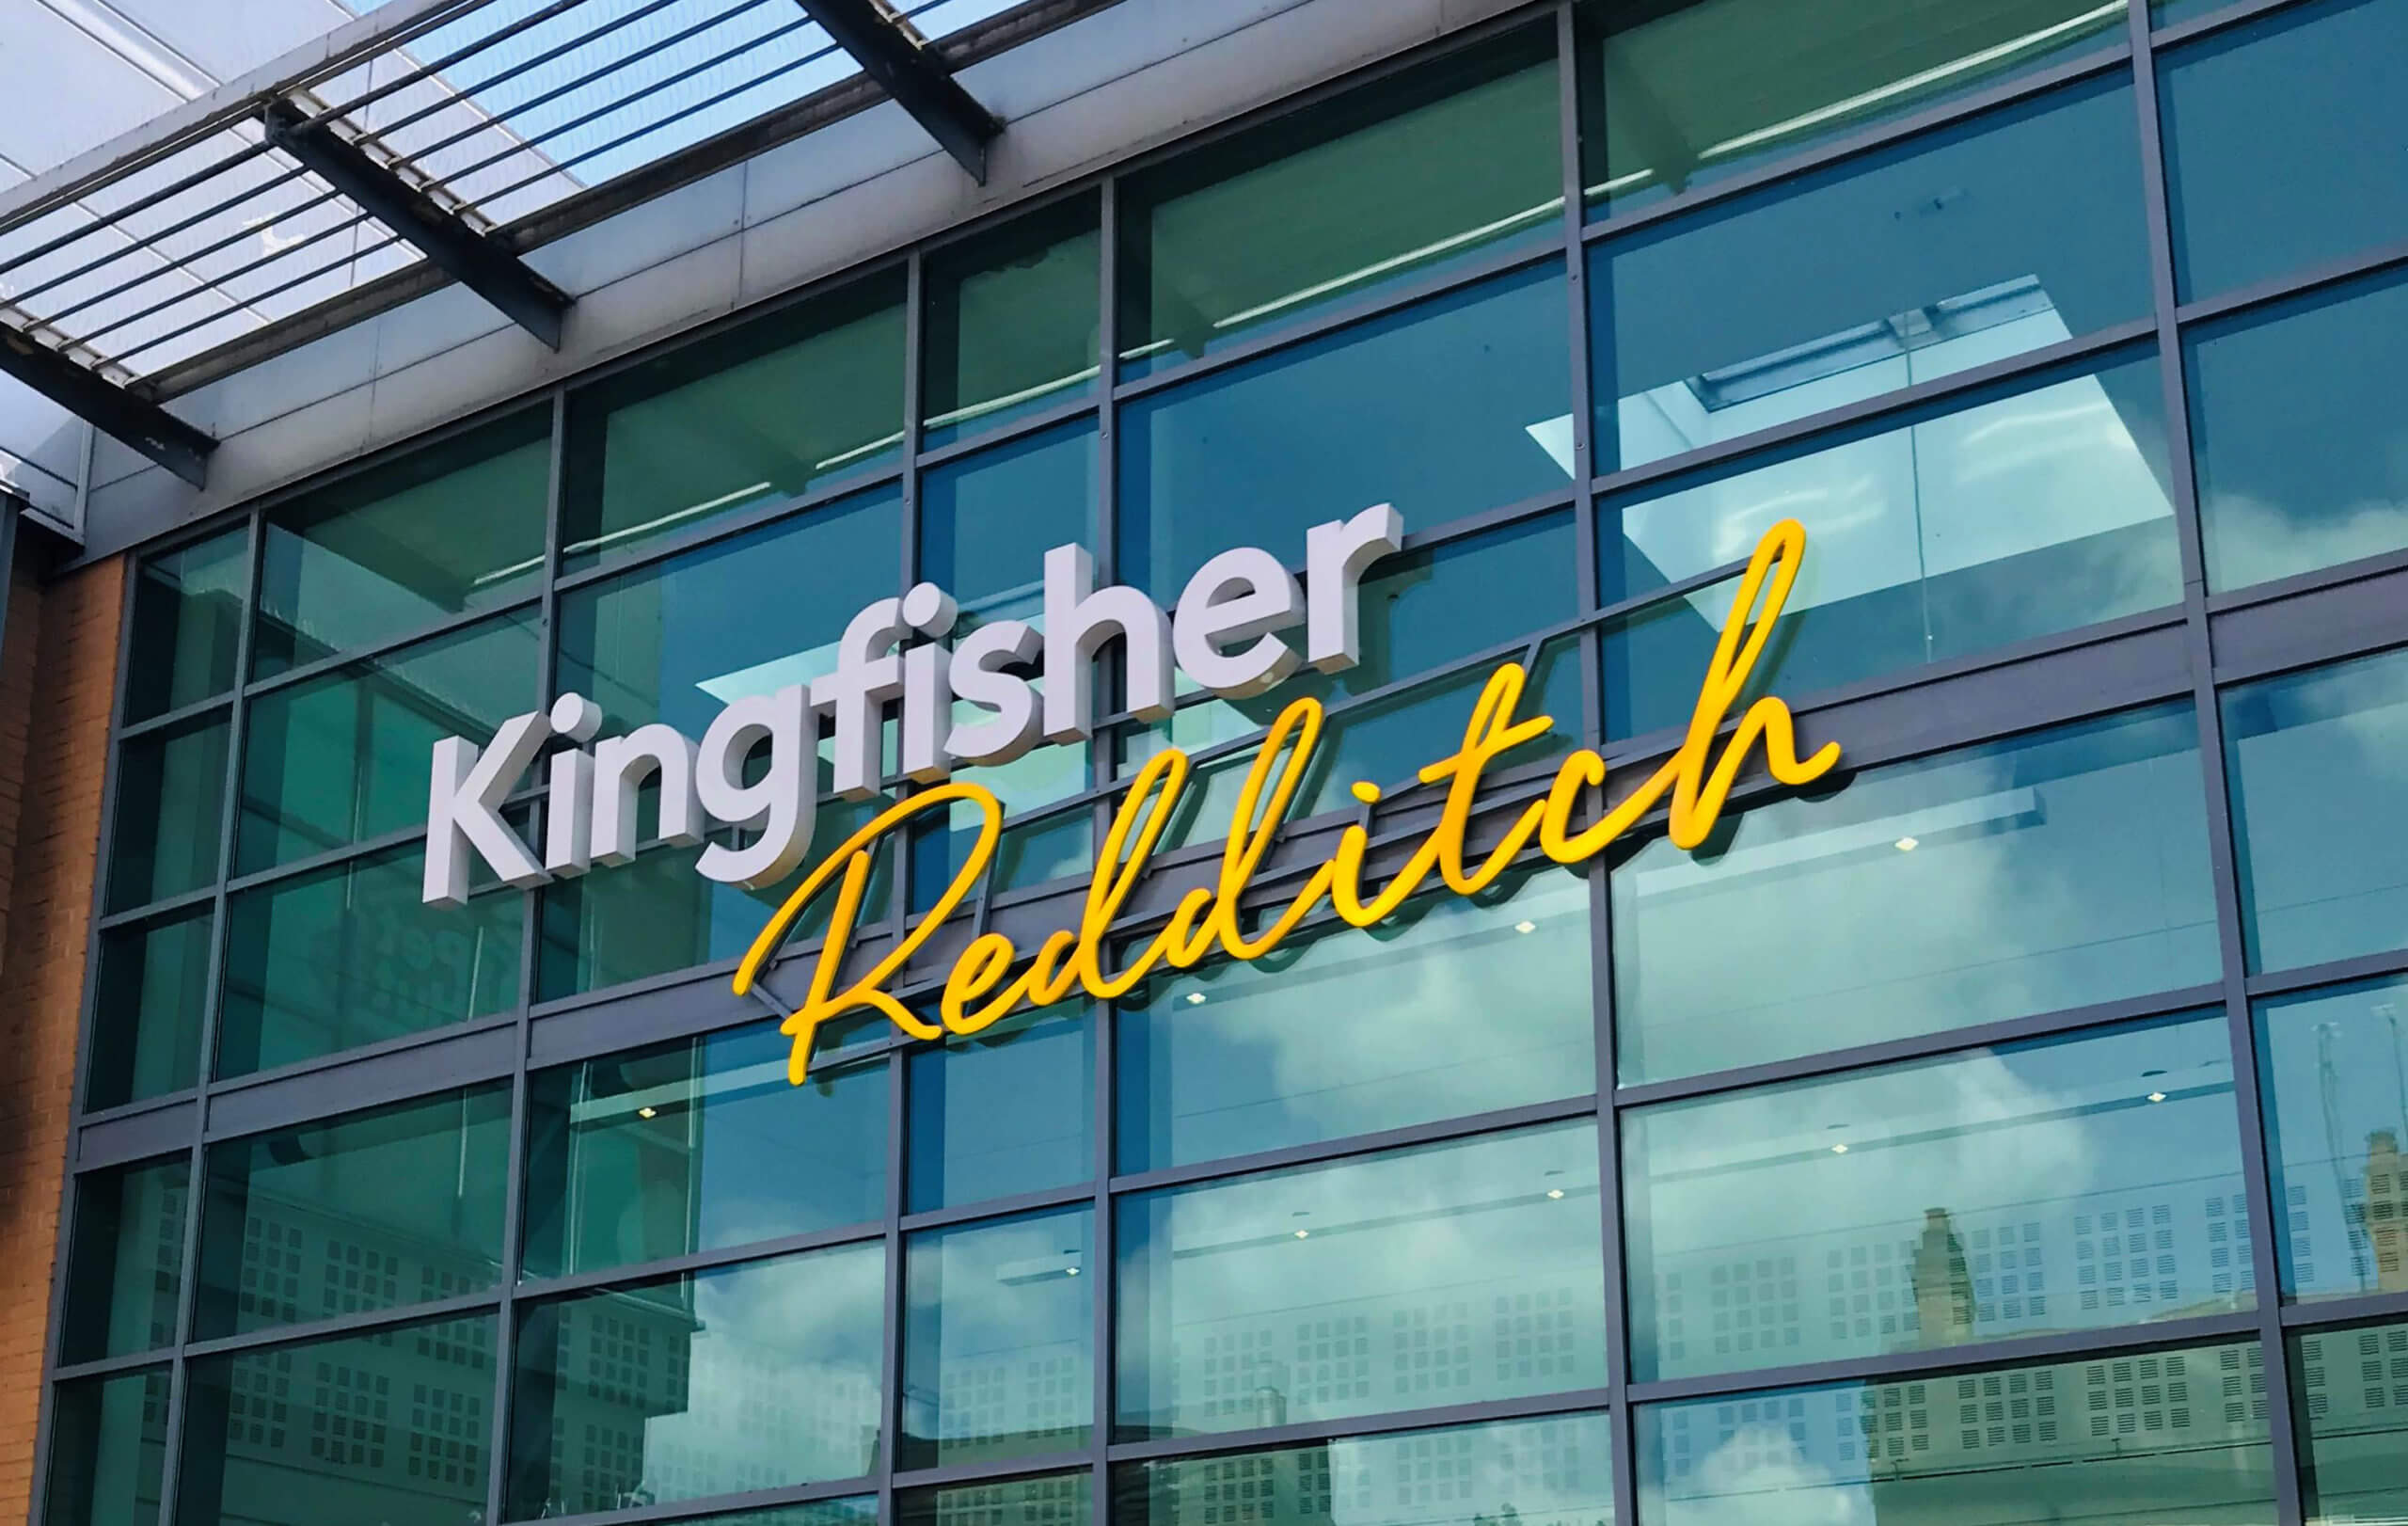 RBH, Kingfisher Shopping Centre, PR Brief